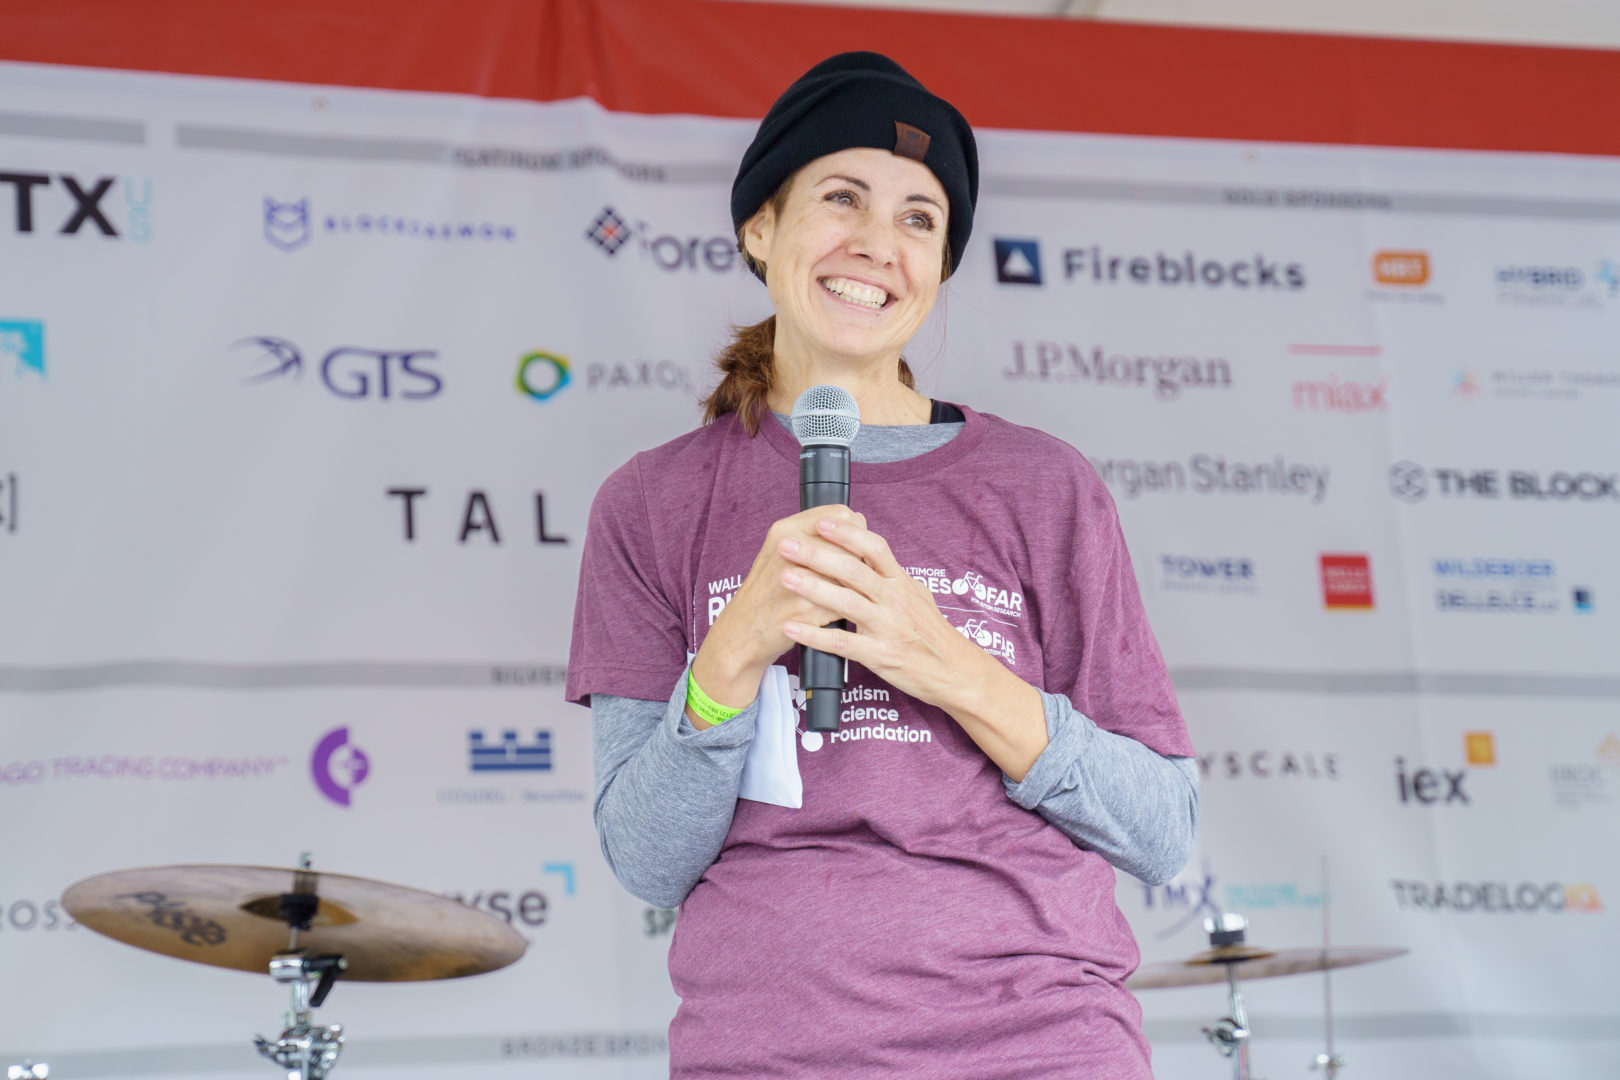 Erin Lopes smiles onstage at the 2022 Rides FAR event in New York